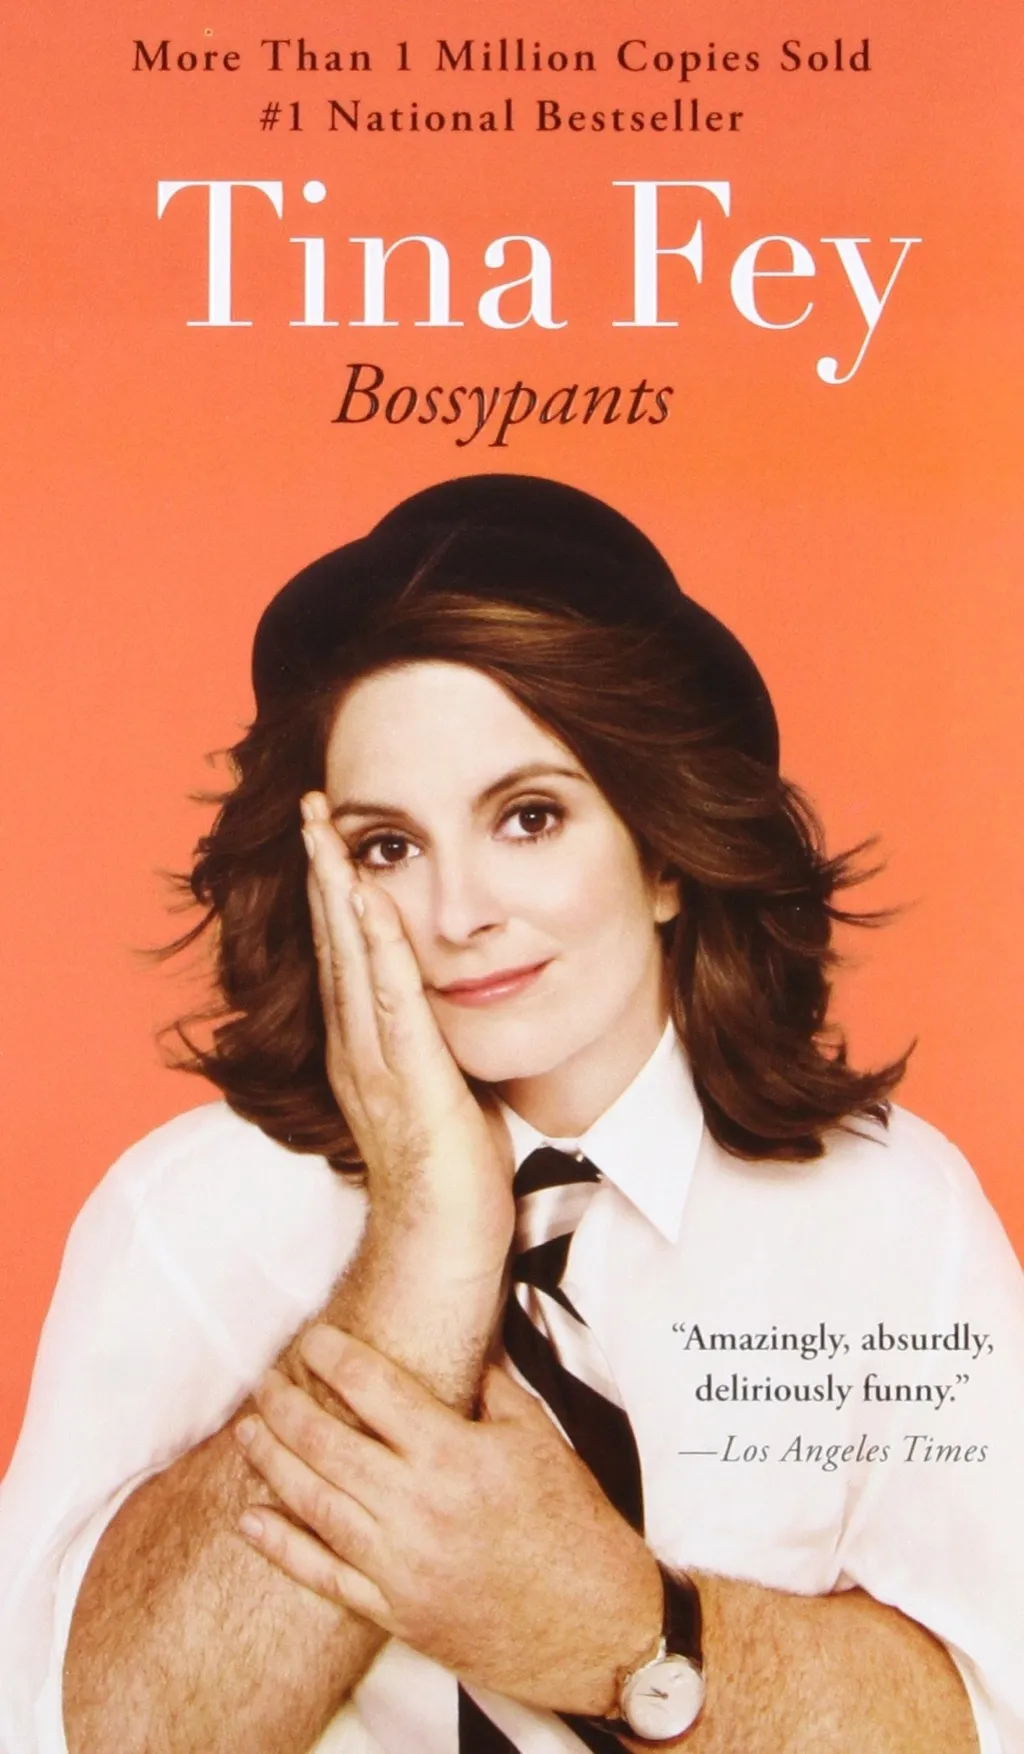 Bossypants books every woman should read in her 40s